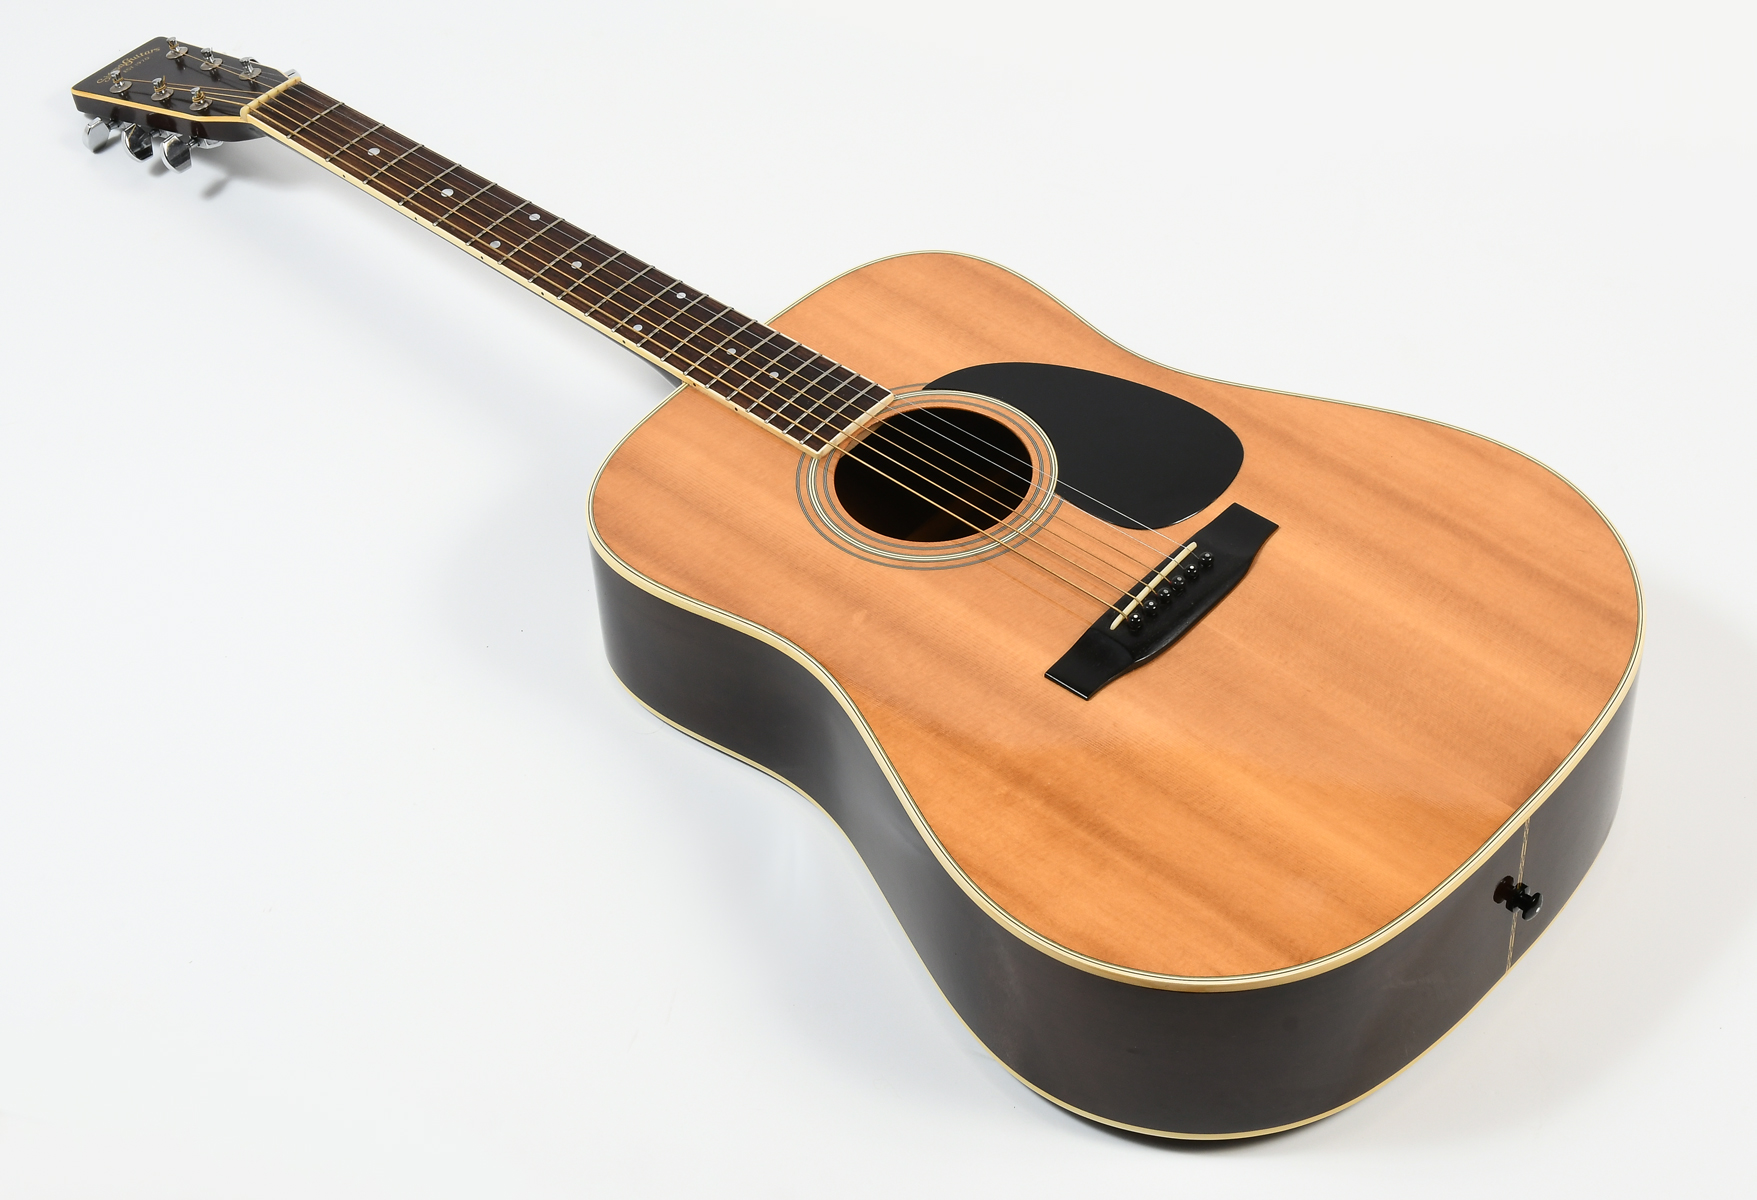 SIGMA DR 7 ACOUSTIC GUITAR BY MARTIN 2ece5c